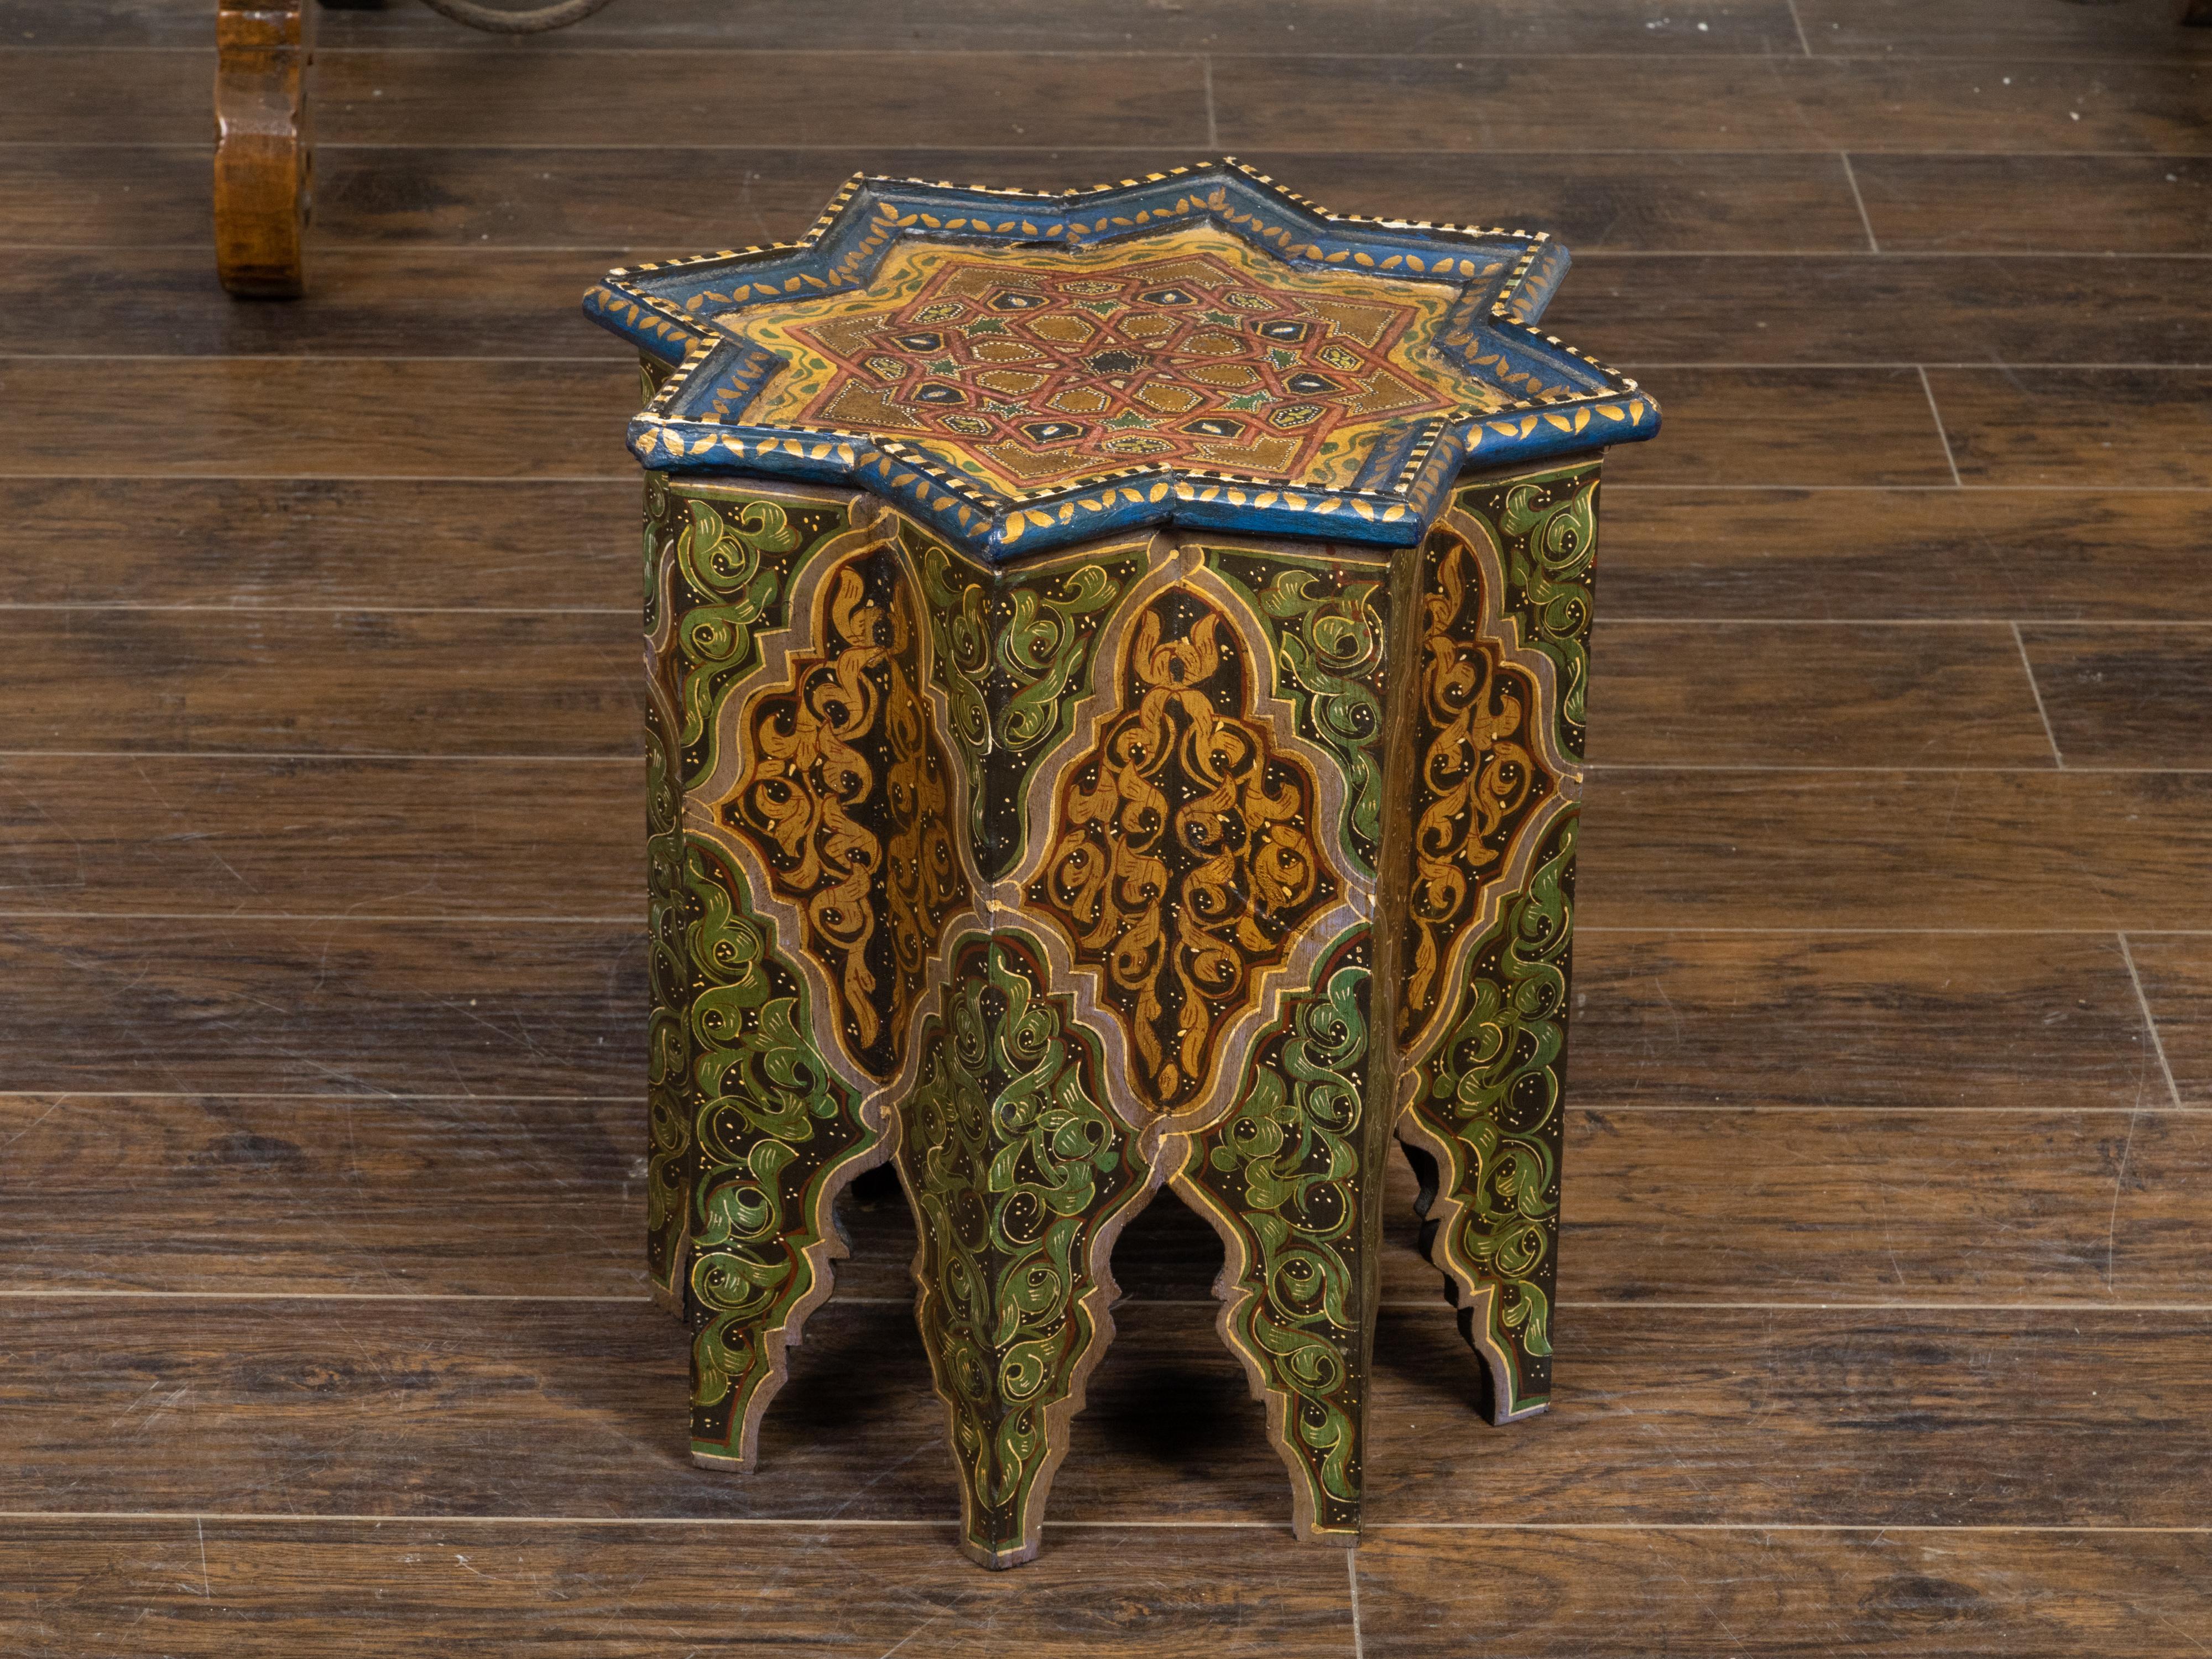 A Moroccan Moorish style drinks table from the early 20th century, with star-shaped top, octagonal body, polychrome décor and carved flaming feet. Created in Morocco during the first quarter of the 20th century, this petite side table captures our